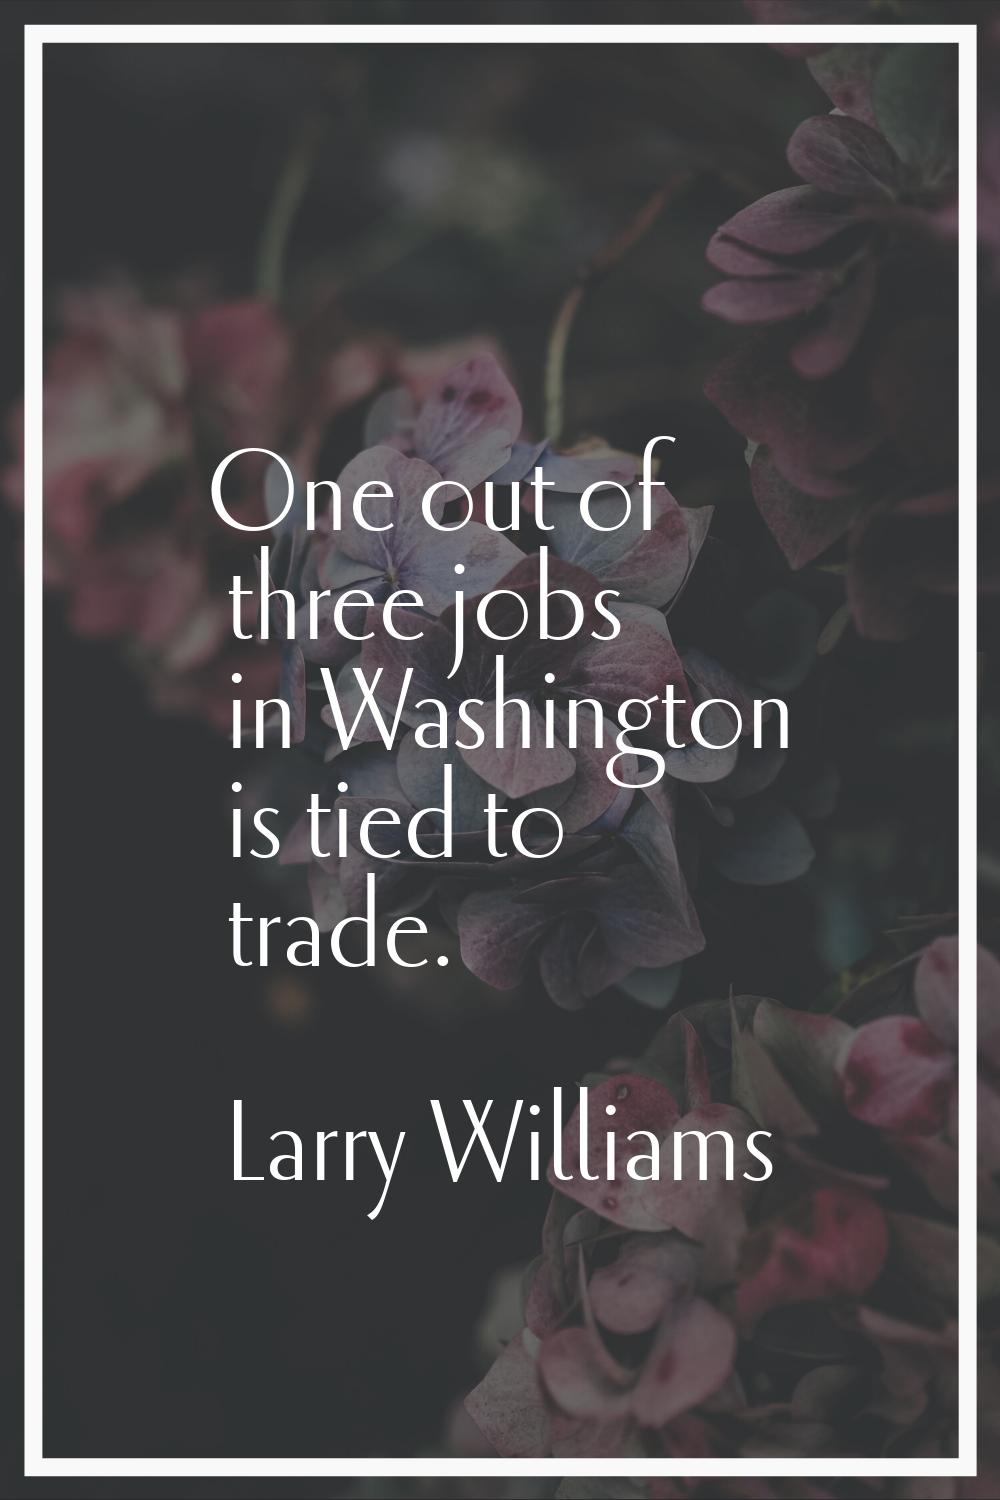 One out of three jobs in Washington is tied to trade.